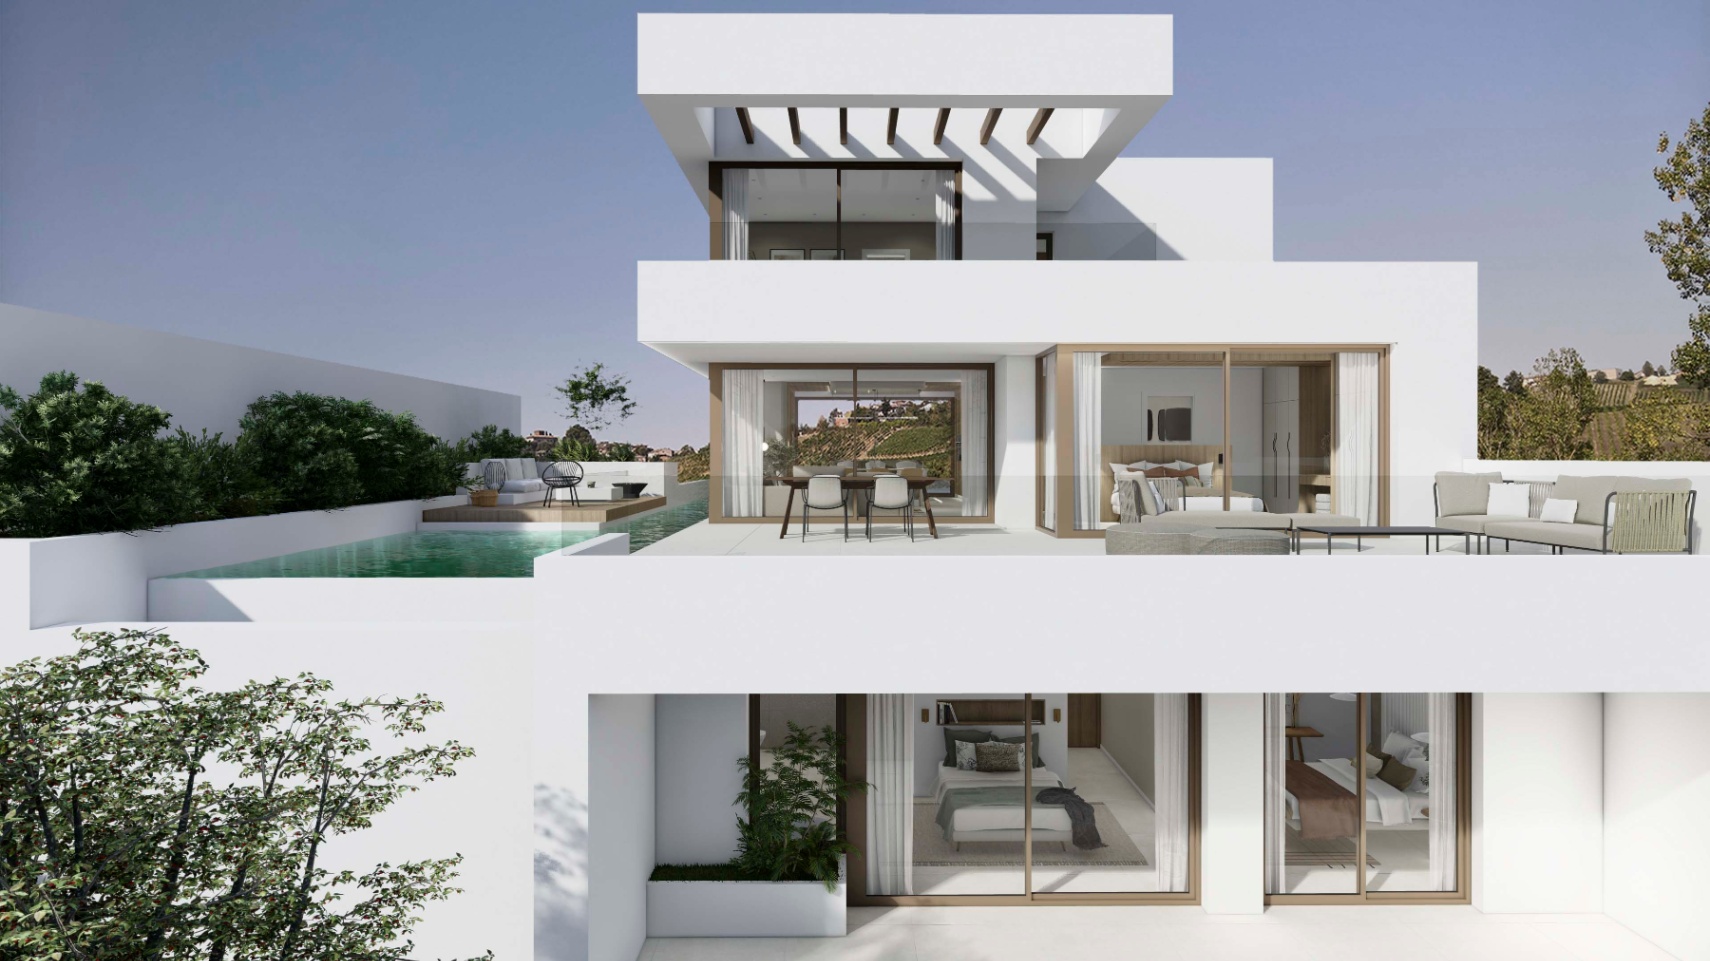 New build modern villa with views of the sea and Benidorm Skyline in Finestrat